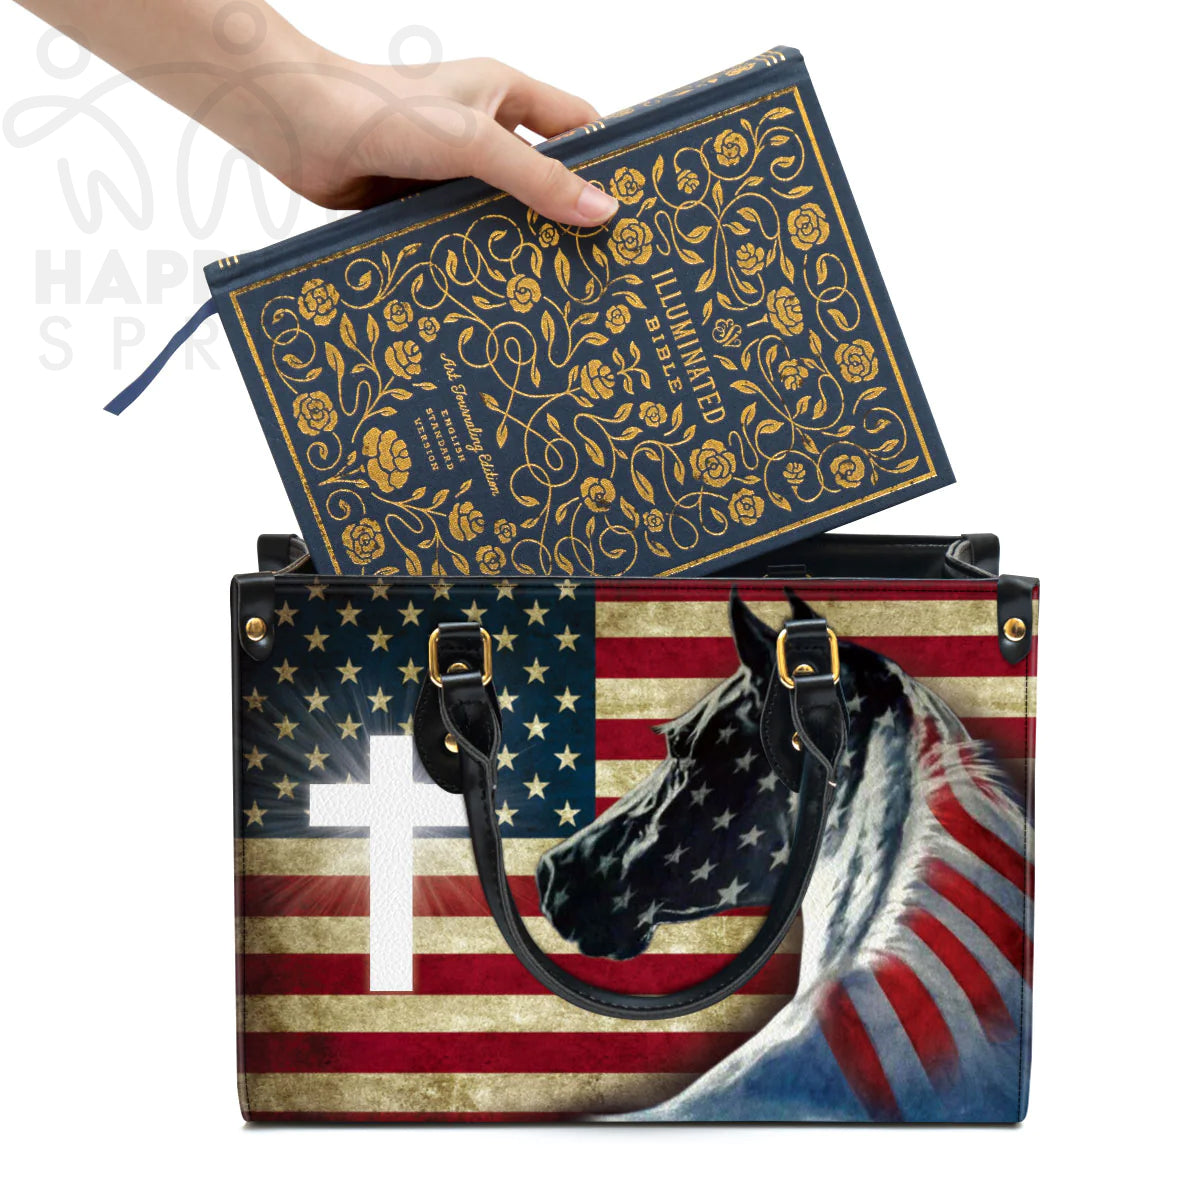 Christianart Handbag, Personalized Hand Bag, American Flag 4th of July, Personalized Gifts, Gifts for Women. - Christian Art Bag